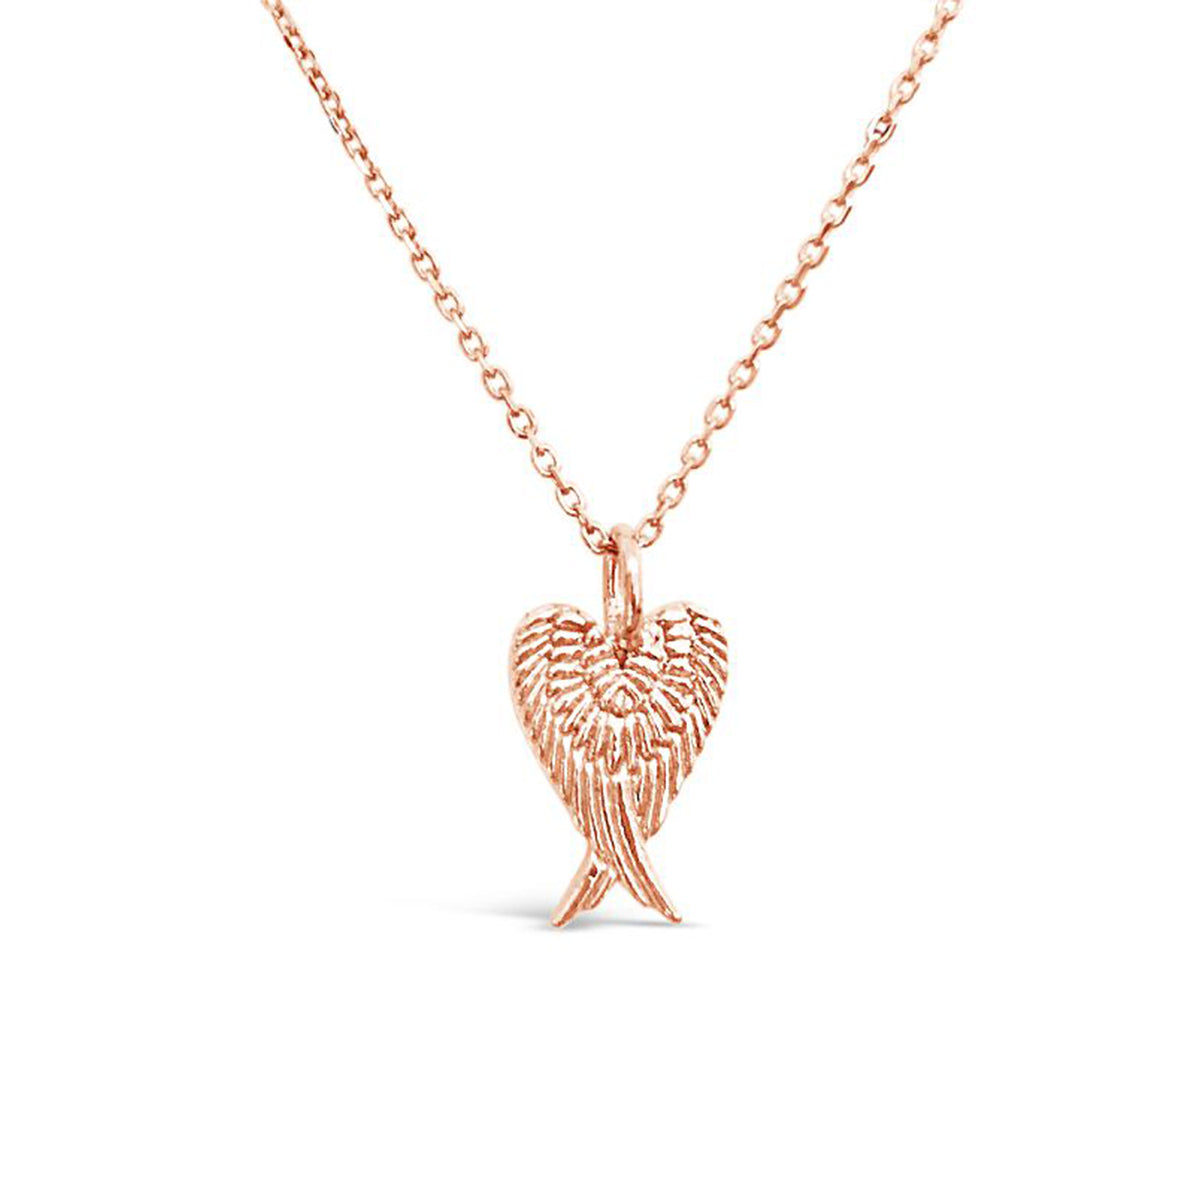 14kt Yellow Gold Angel Wings Heart Pendant Necklace. 18